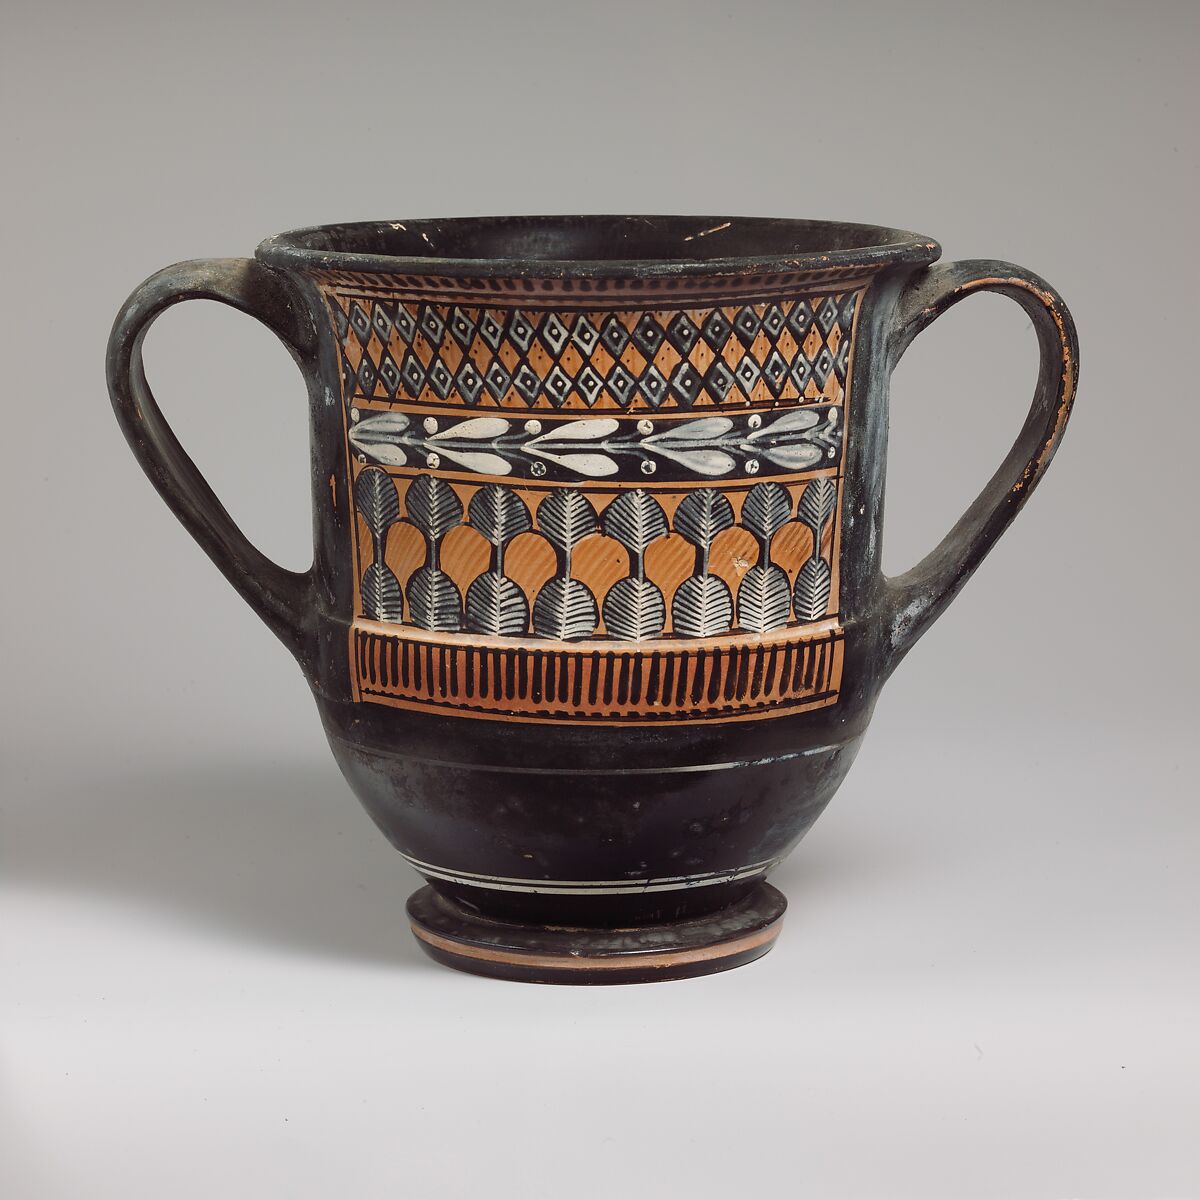 Terracotta sessile kantharos (deep cylindrical drinking cup with two handles), Terracotta, Greek, Attic 